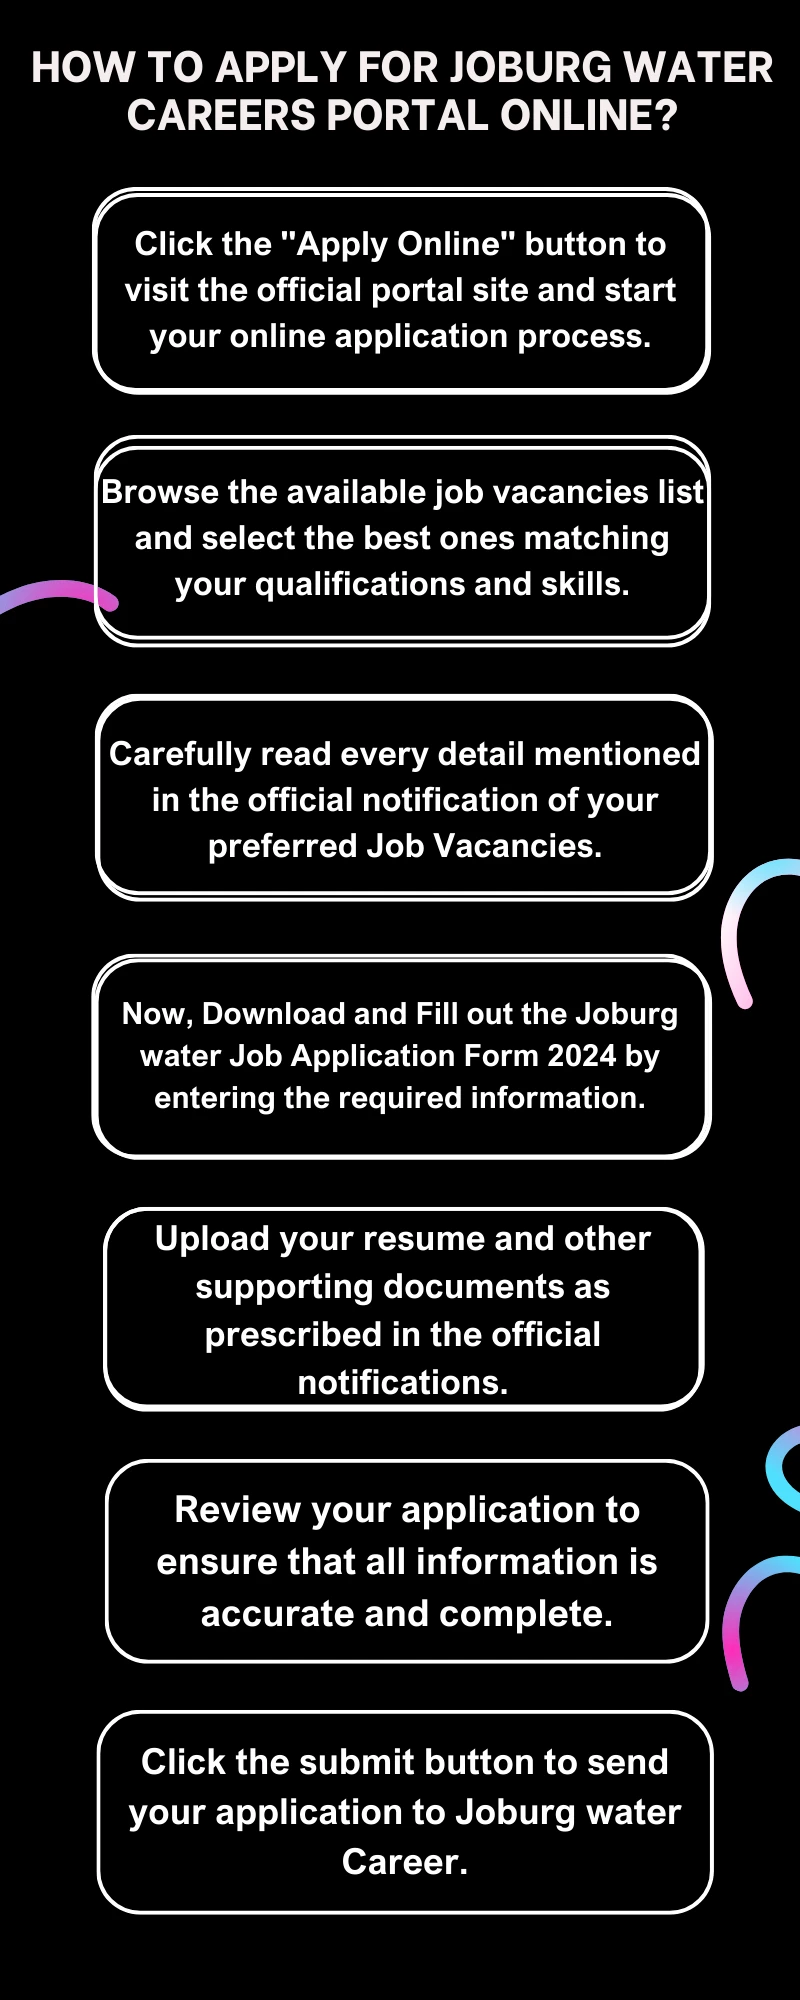 How To Apply for Joburg Water Careers Portal Online?